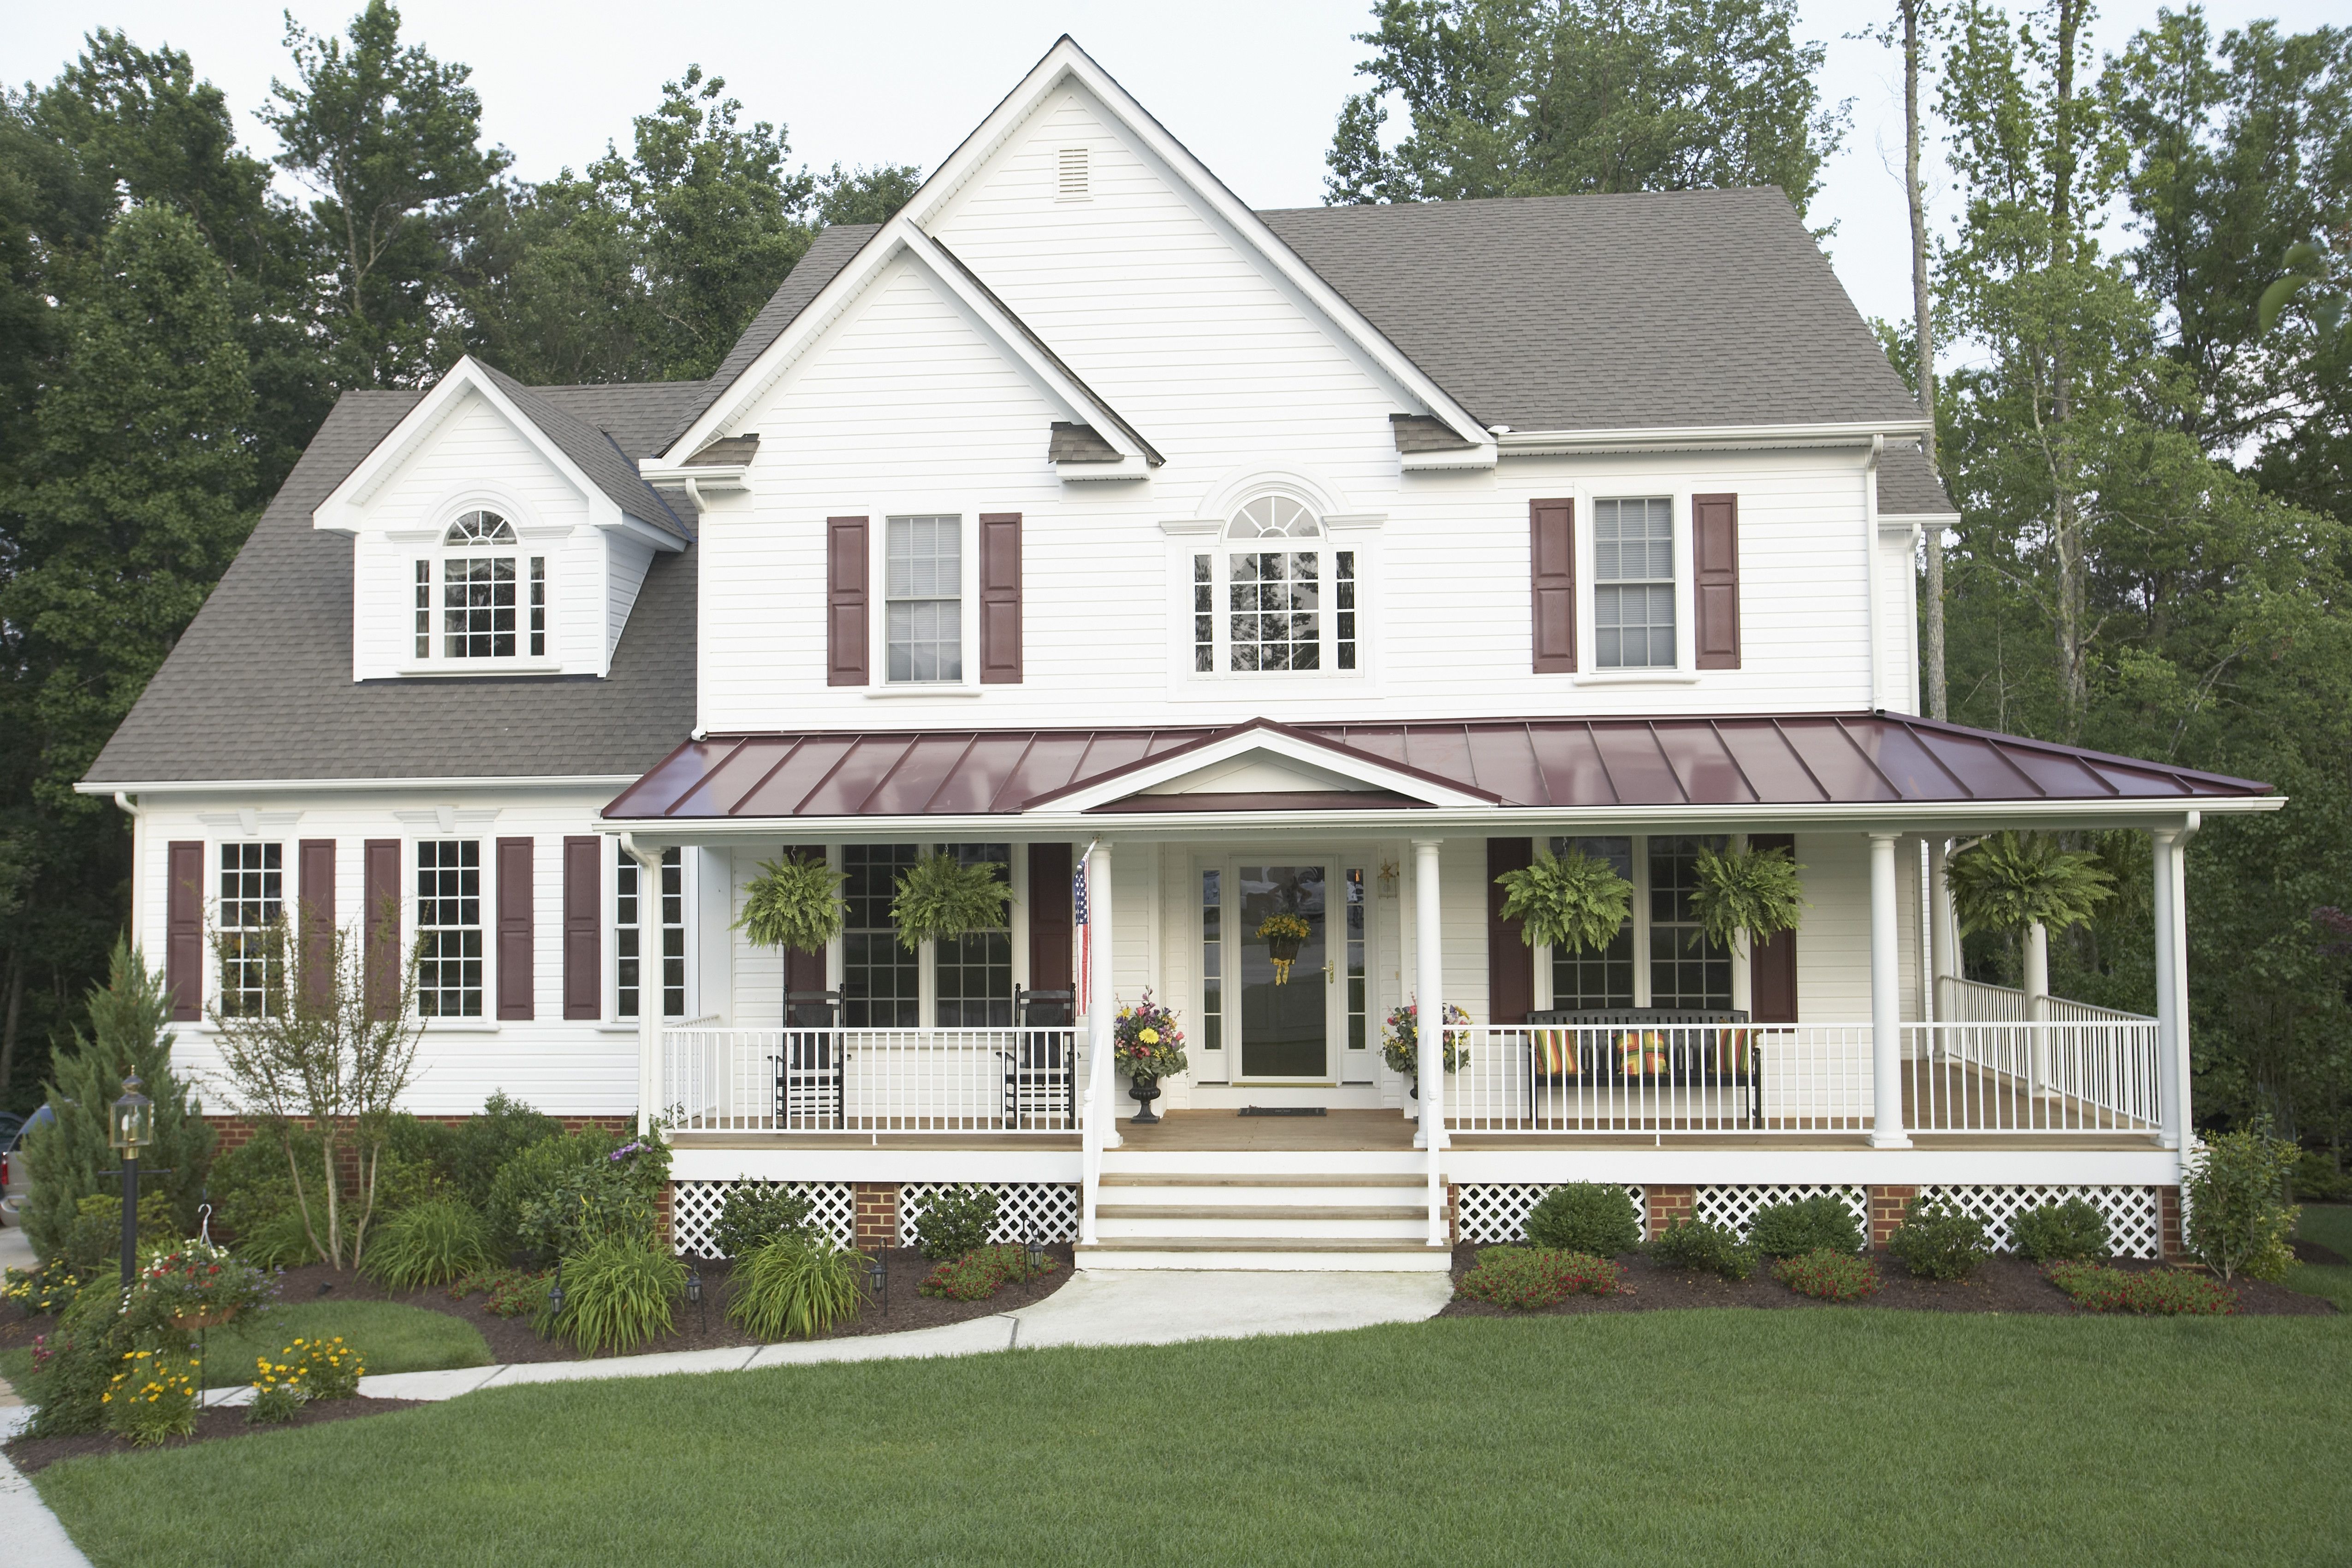 14 Charming Wraparound Porch Ideas to Complete Your Dream House